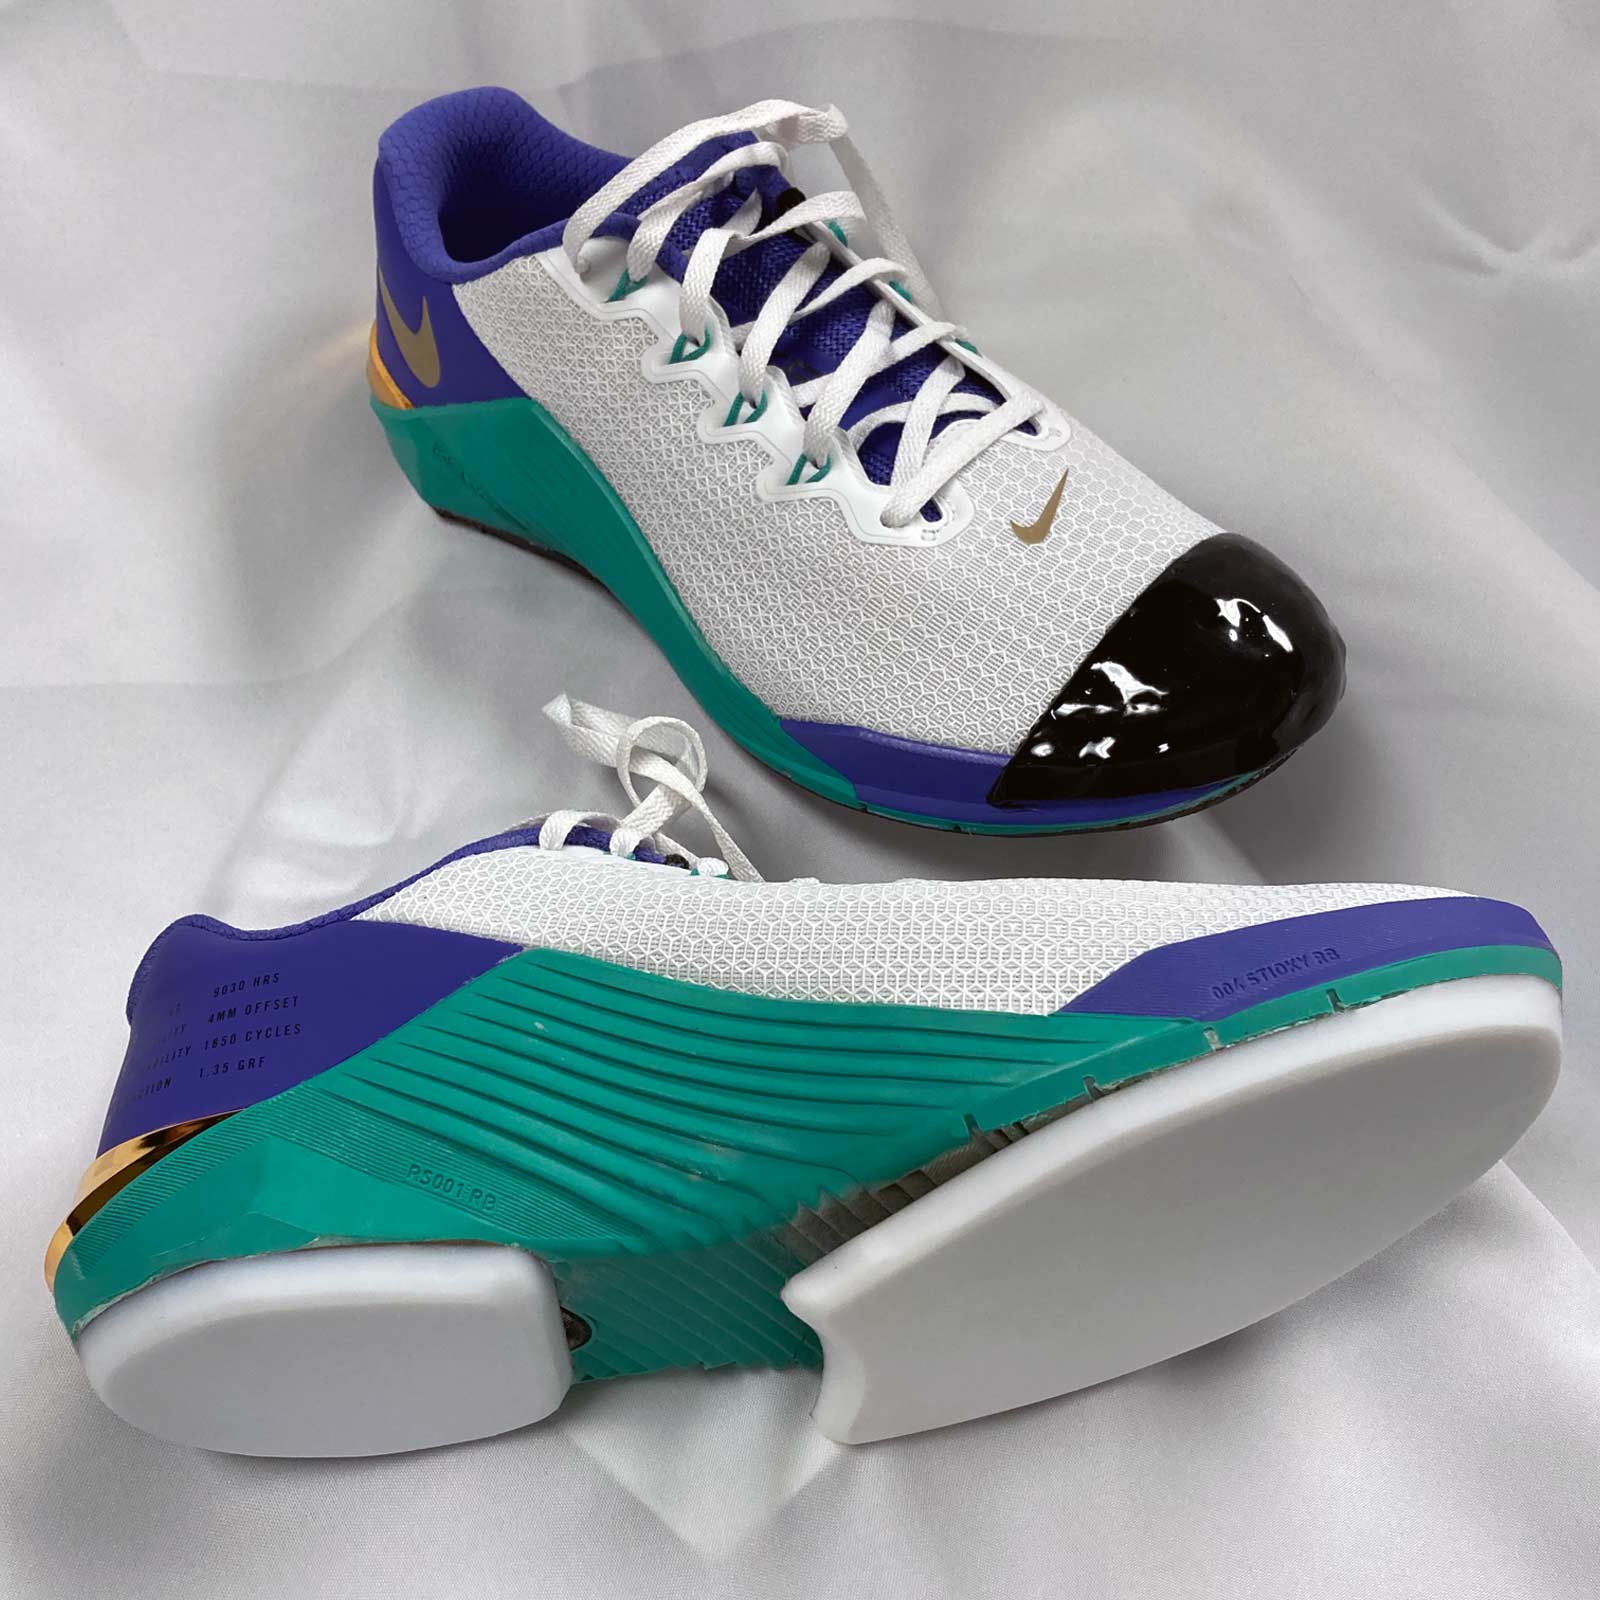 Left- And Right-Handed Options for Curling Shoe